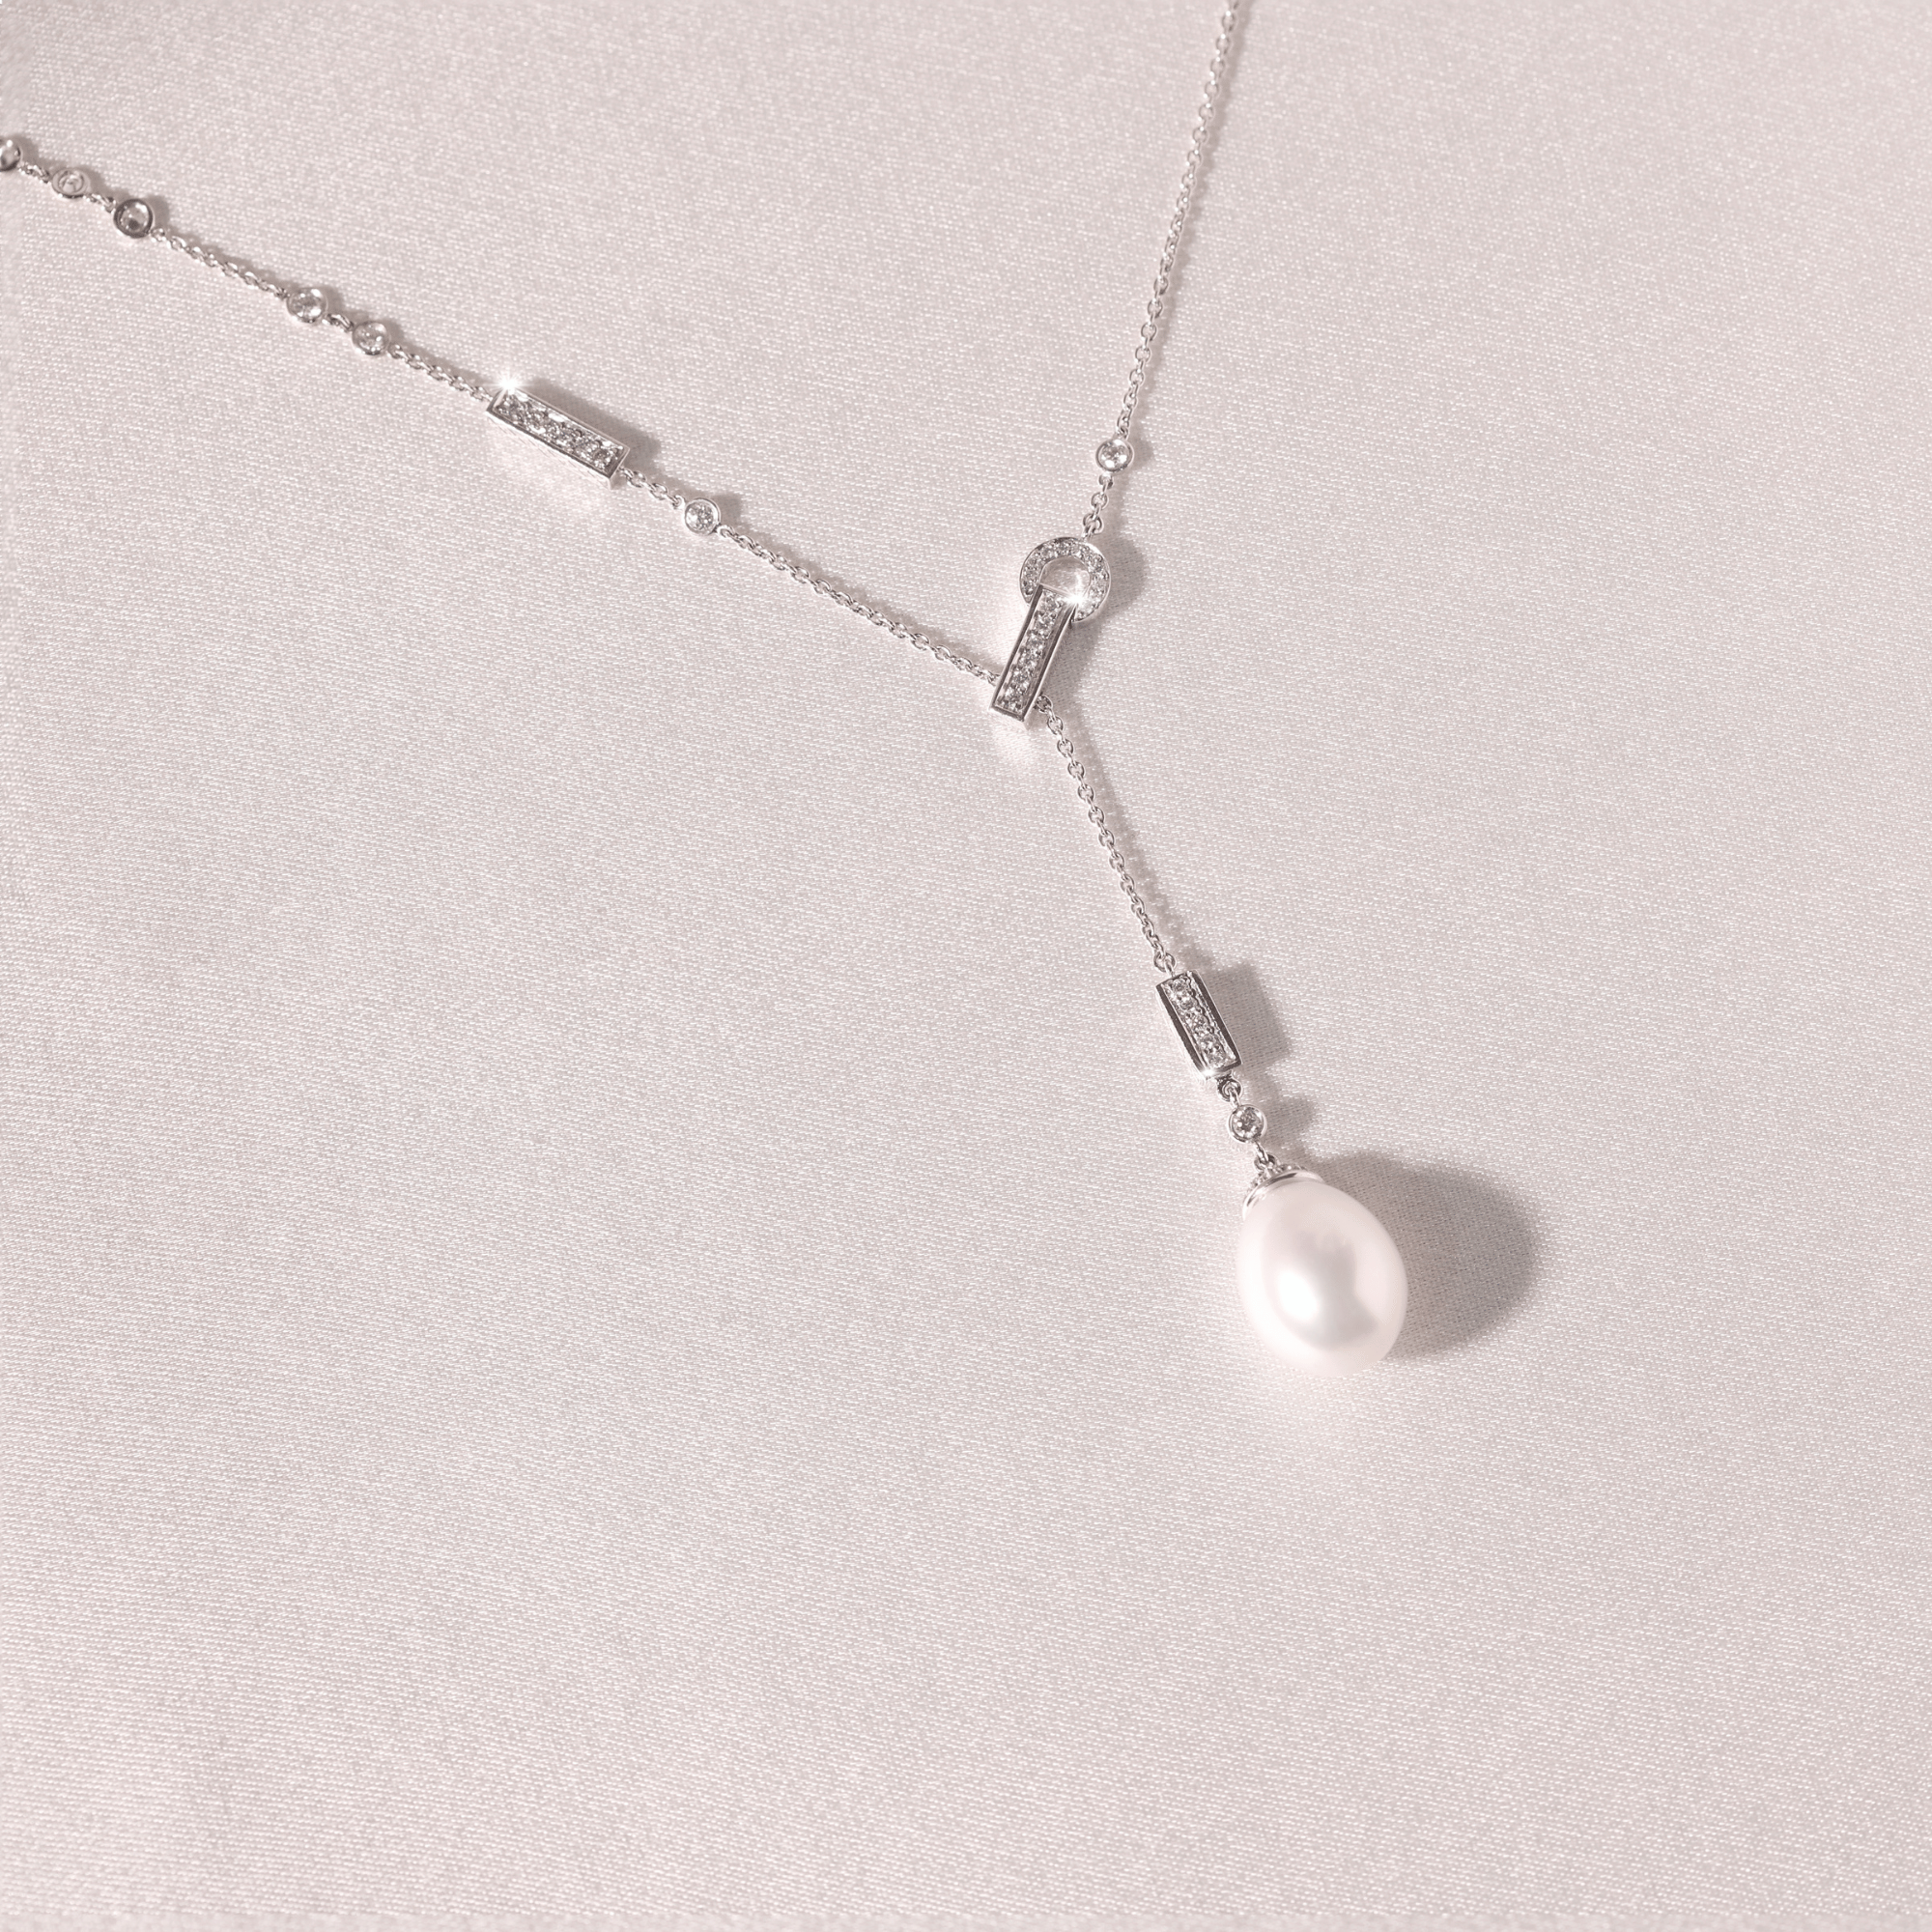 The Wolgan Necklace With A South Sea Pearl